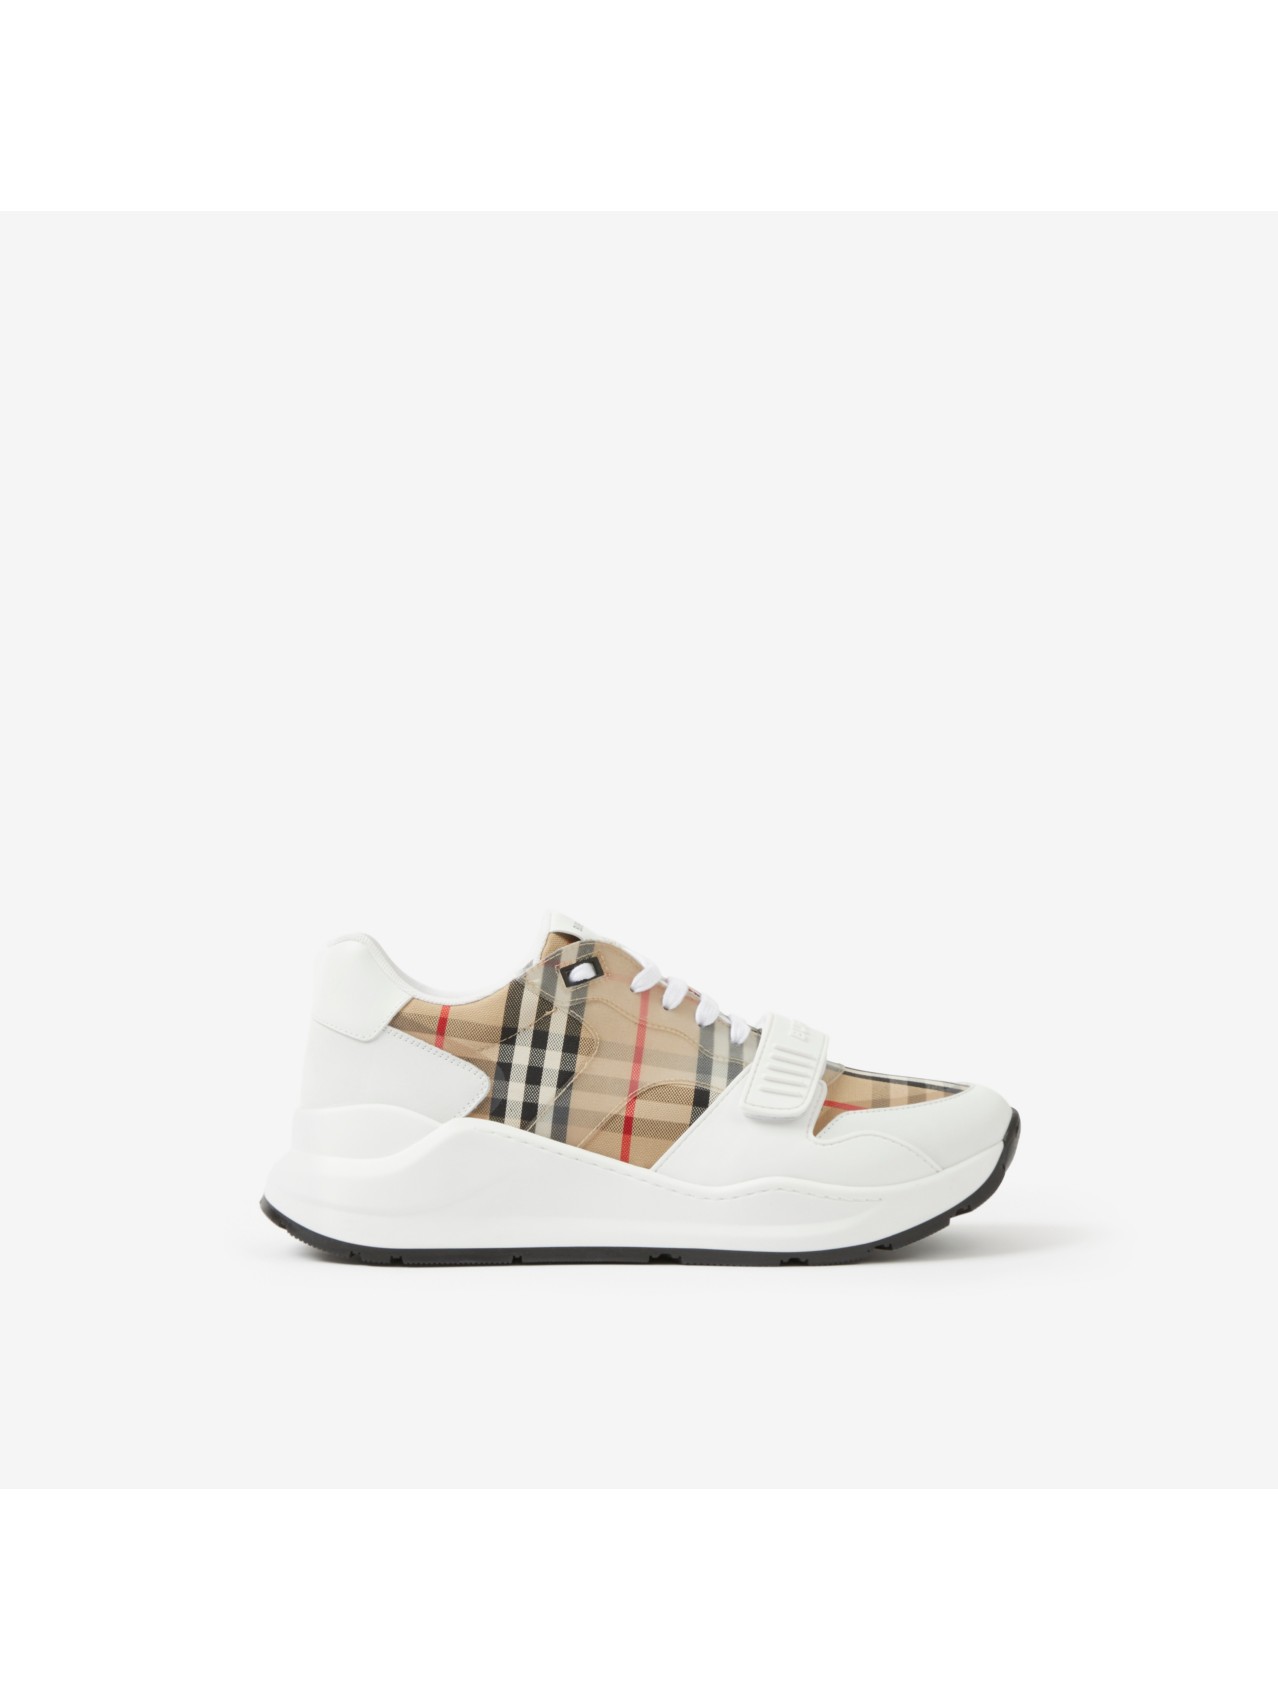 perturbación ingeniero Camarada Check and Leather Sneakers in White, Clear - Men | Burberry® Official